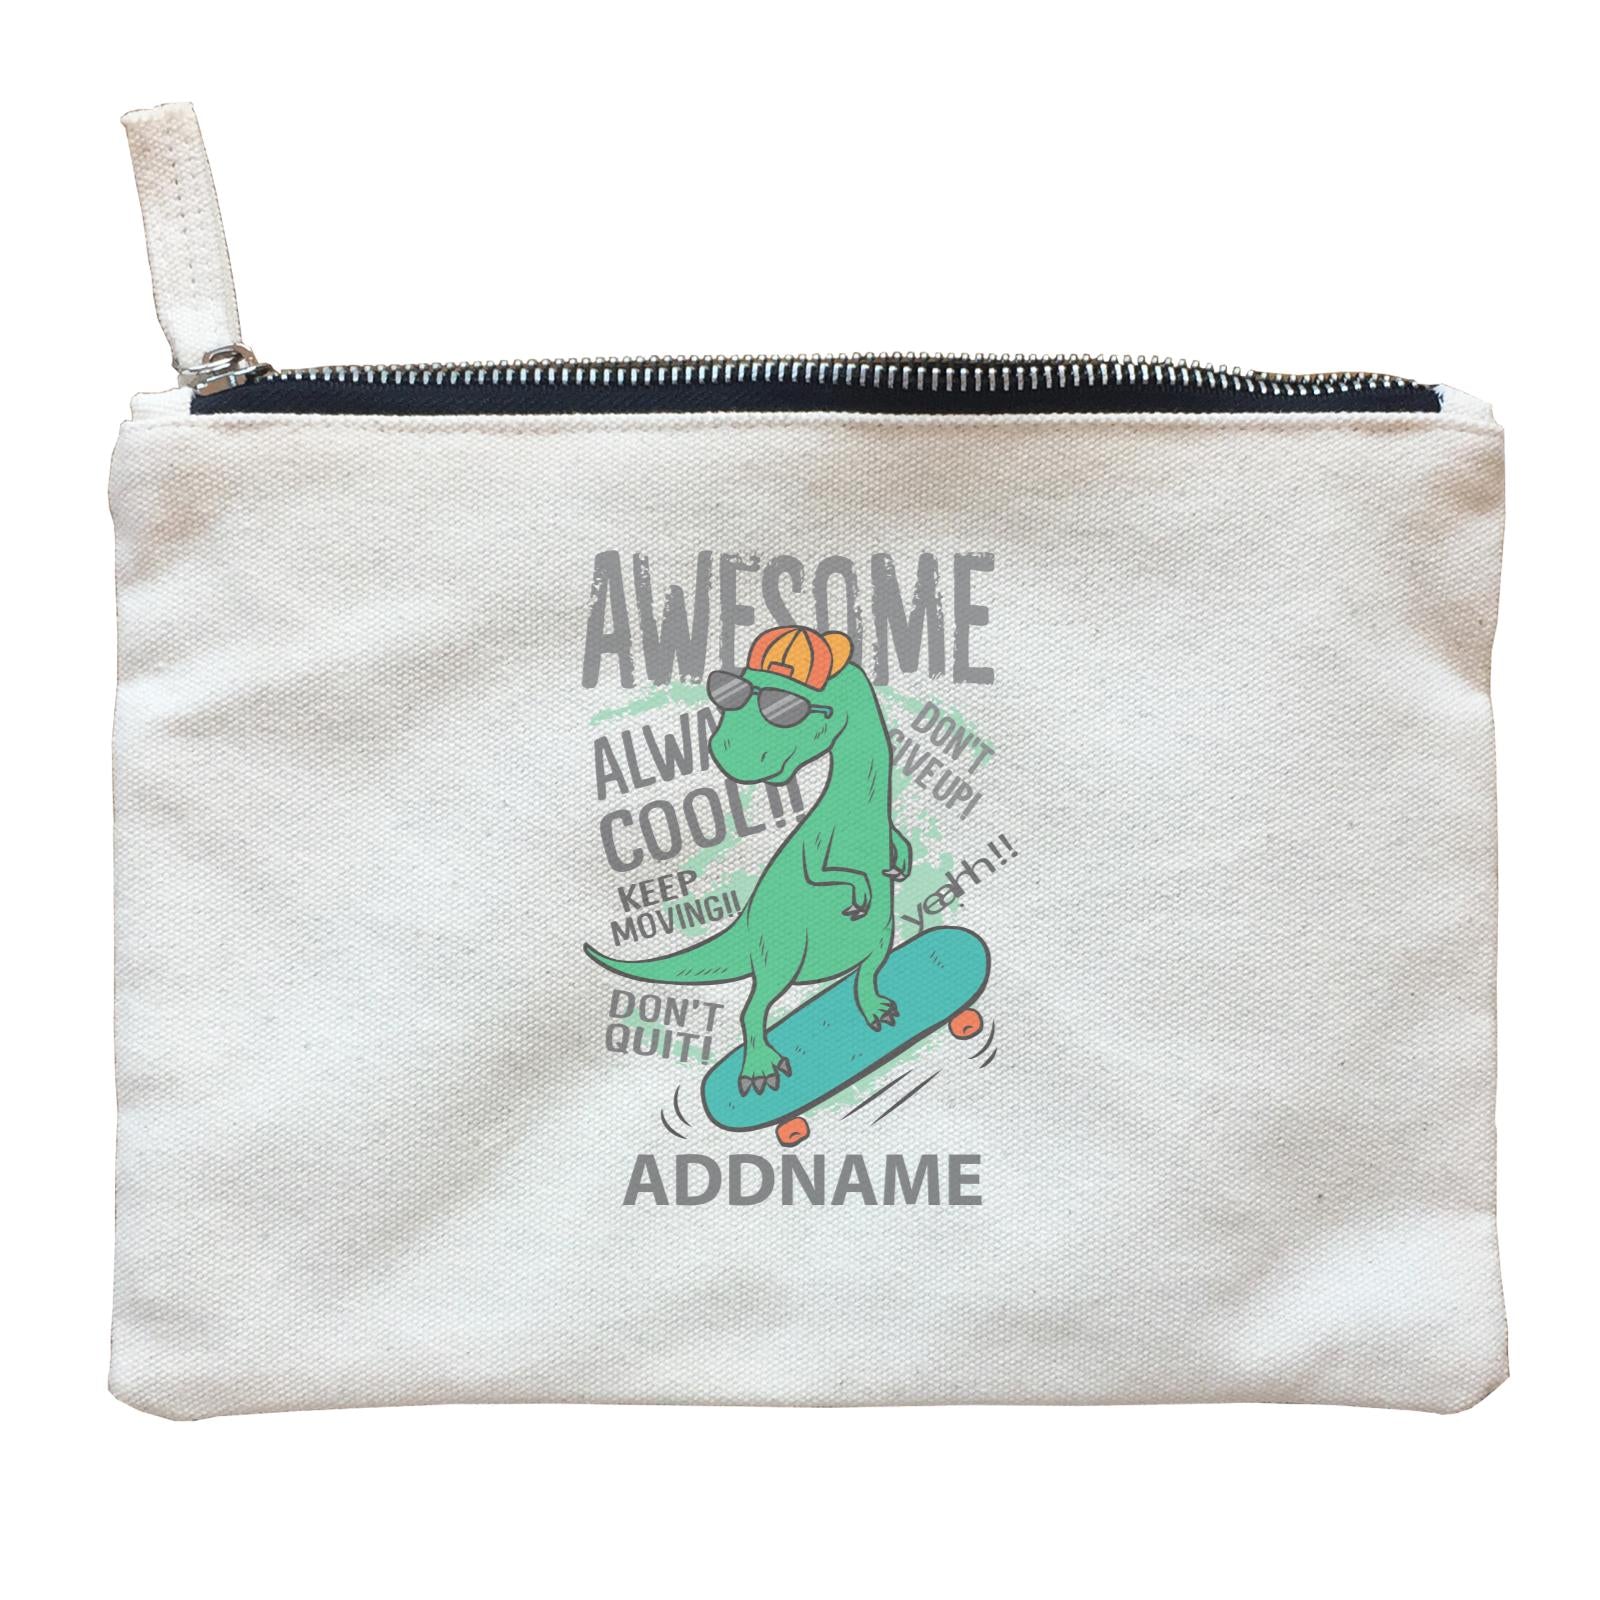 Cool Cute Dinosaur Awesome Always Cool Playing Skateboard Addname Zipper Pouch